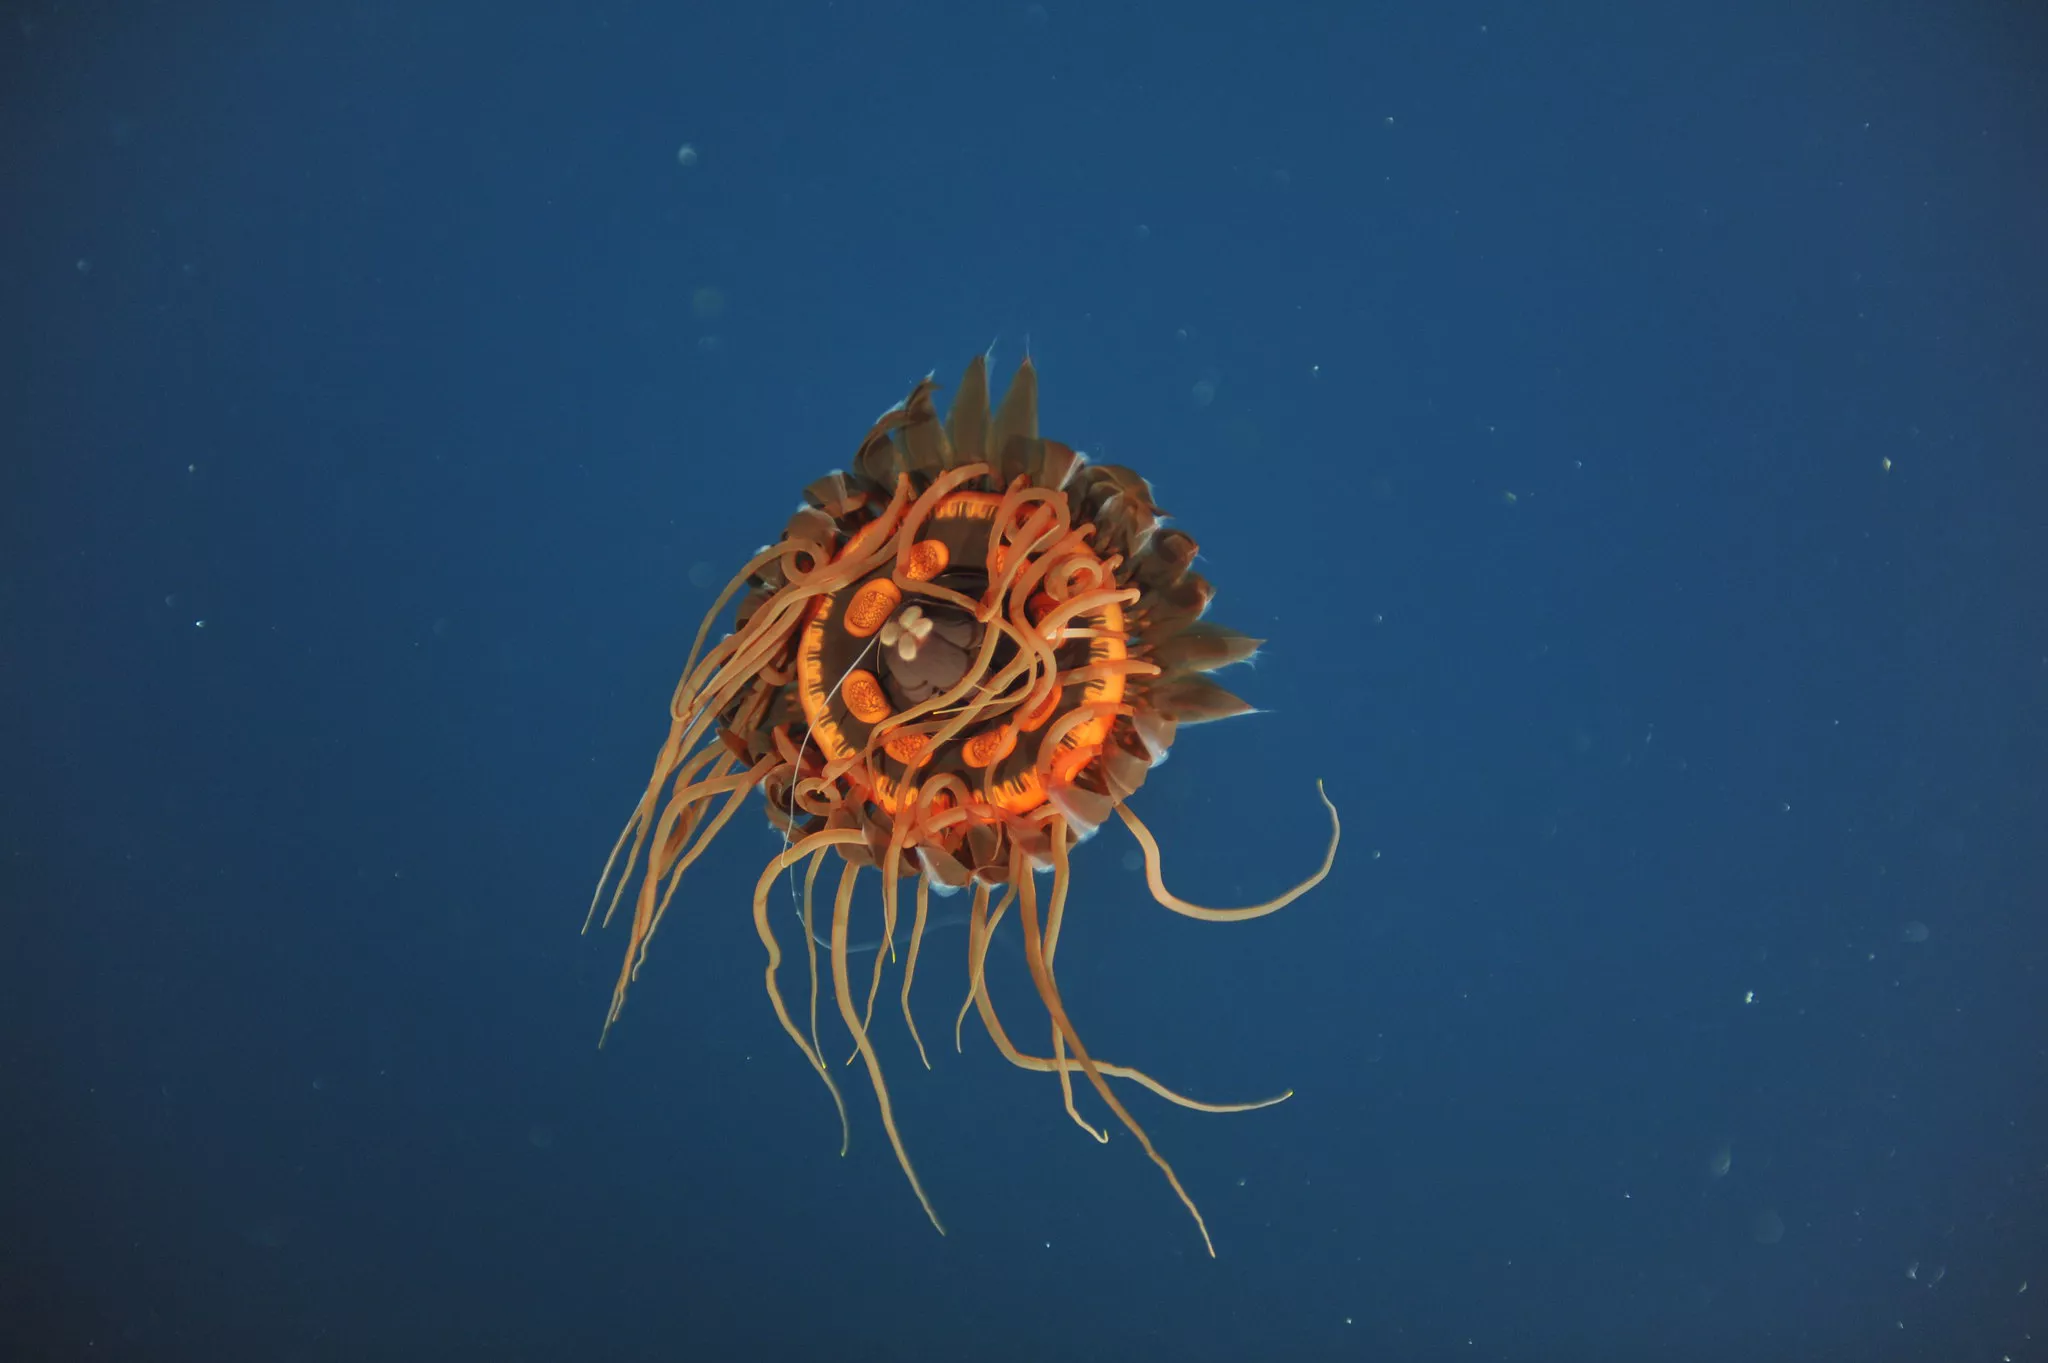 Underside of an Atolla jelly with long, thin tentacles